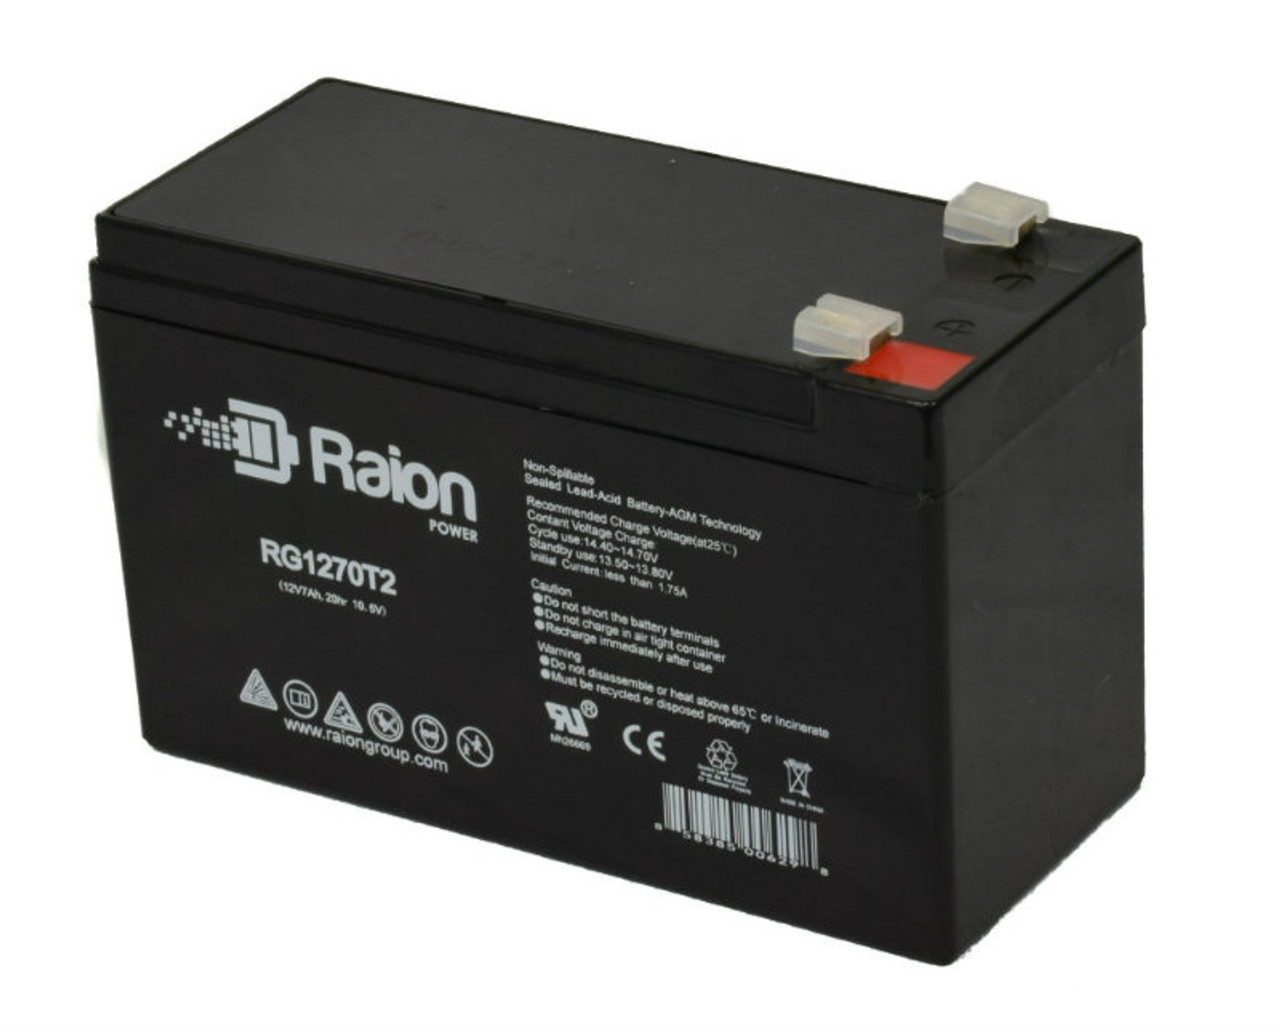 Raion Power RG1270T1 12V 7Ah Non-Spillable Replacement Battery for FirstPower FP1265A